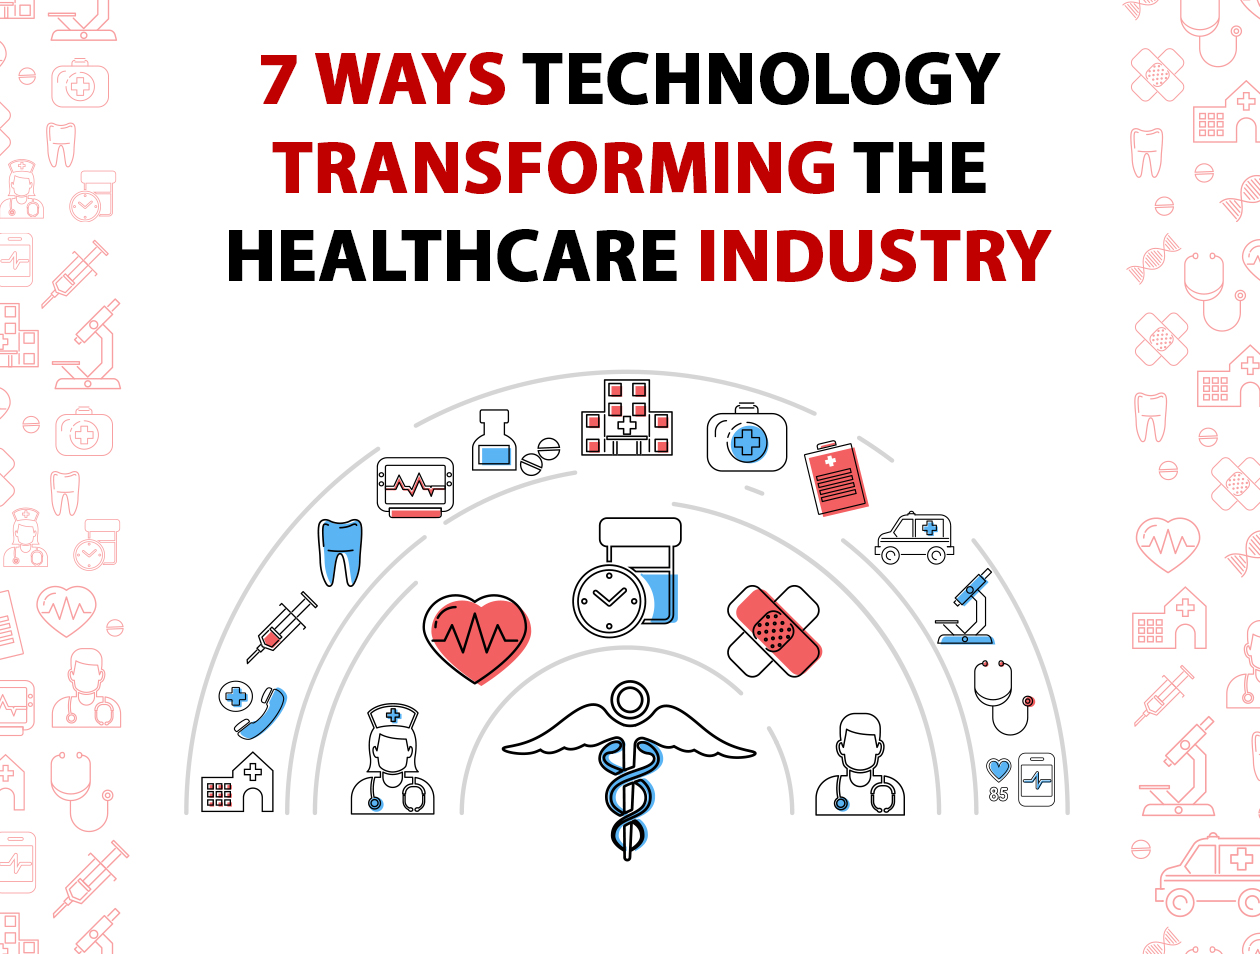 7 Ways Technology is Transforming the Healthcare Industry